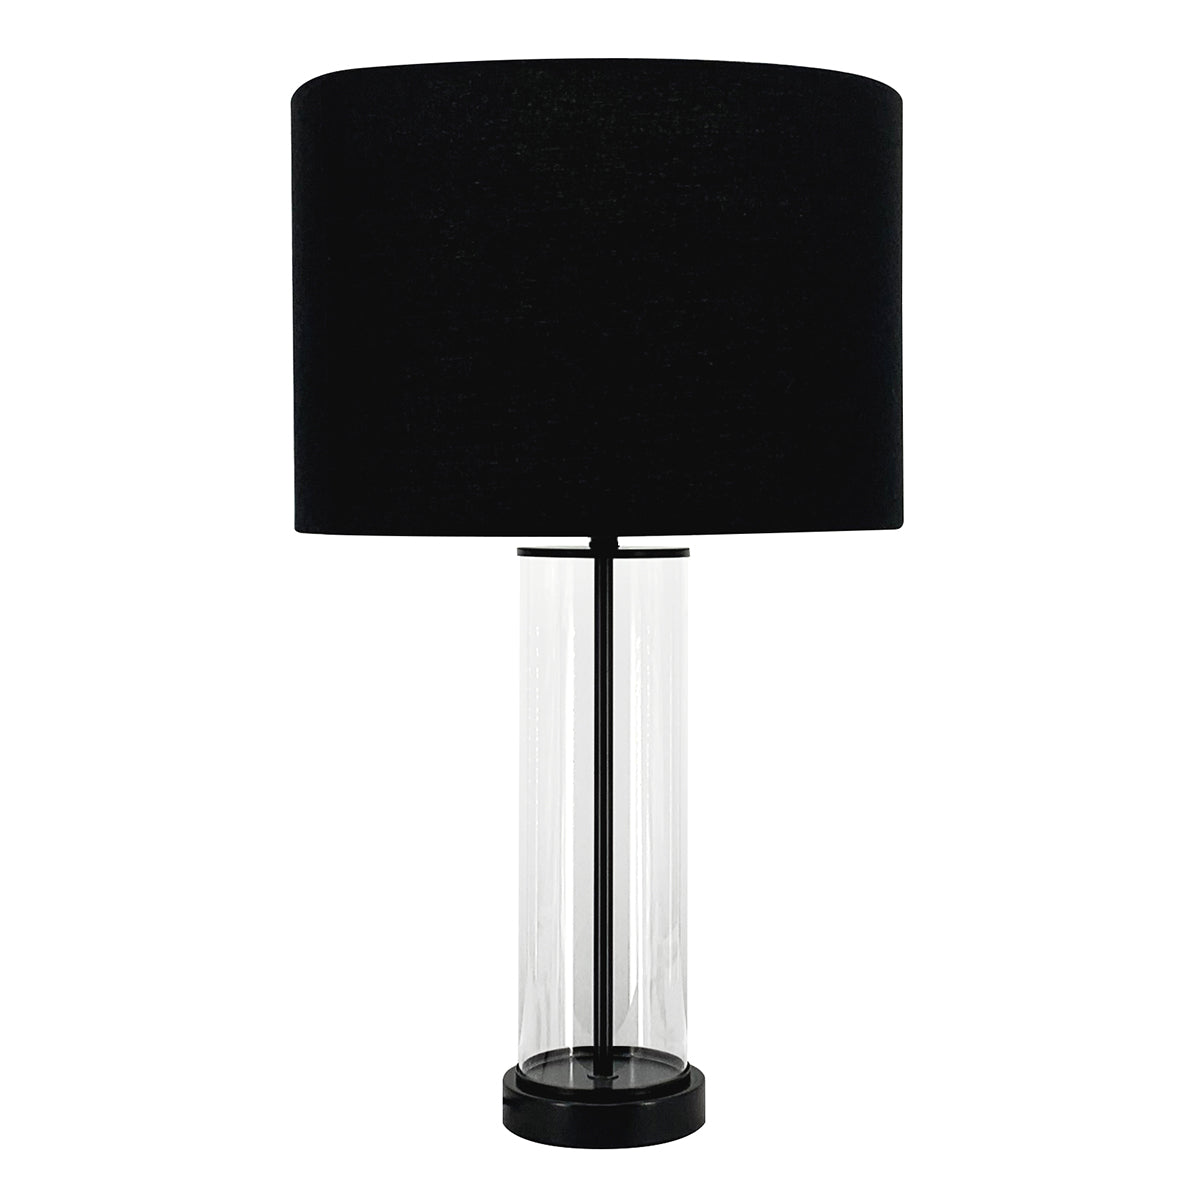 East Side Table Lamp - Black with Black Shade